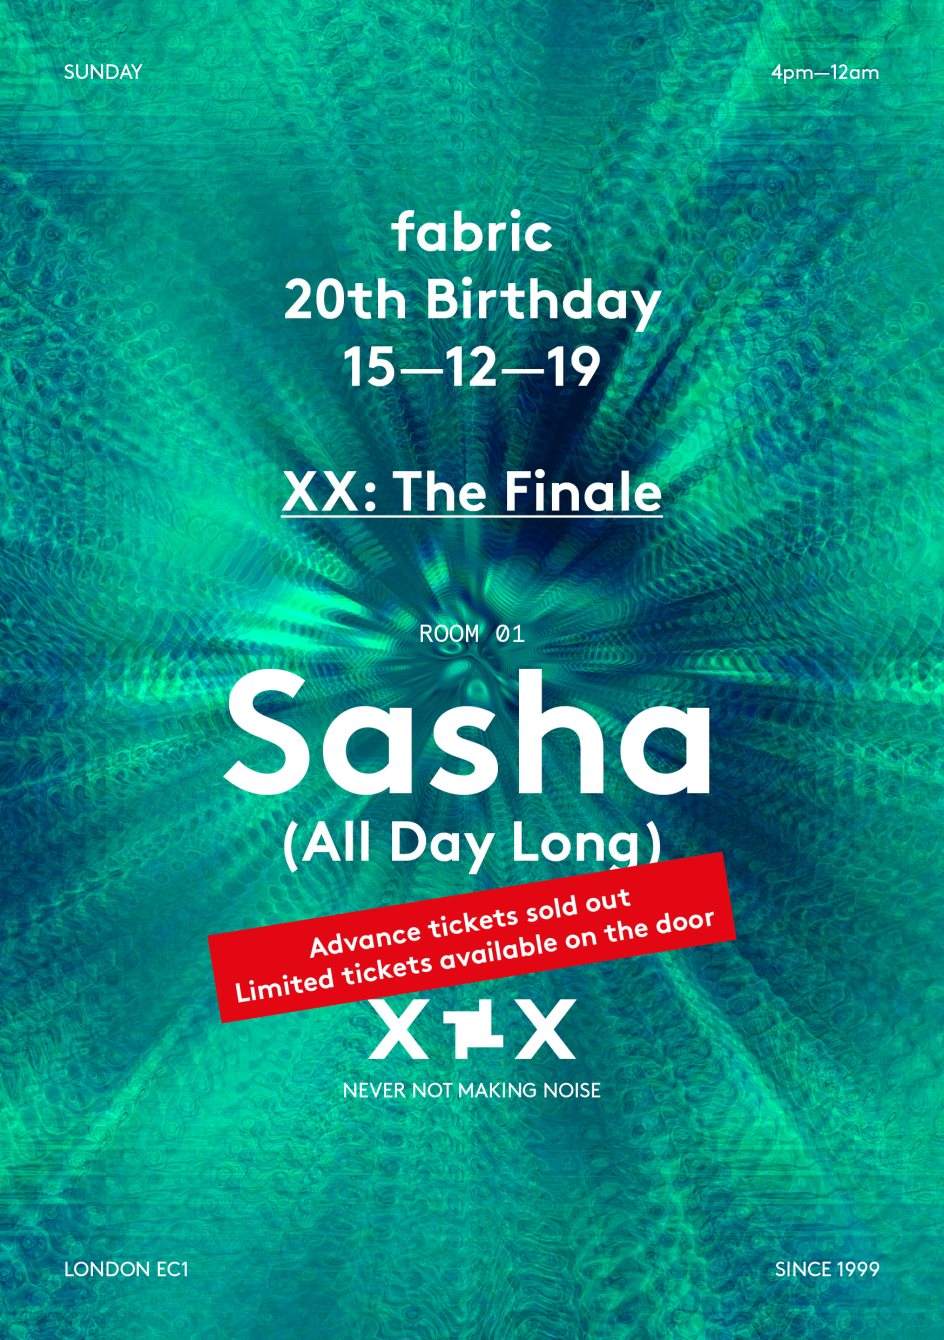 fabric XX: The Finale with Sasha (All Day Long) - Página trasera